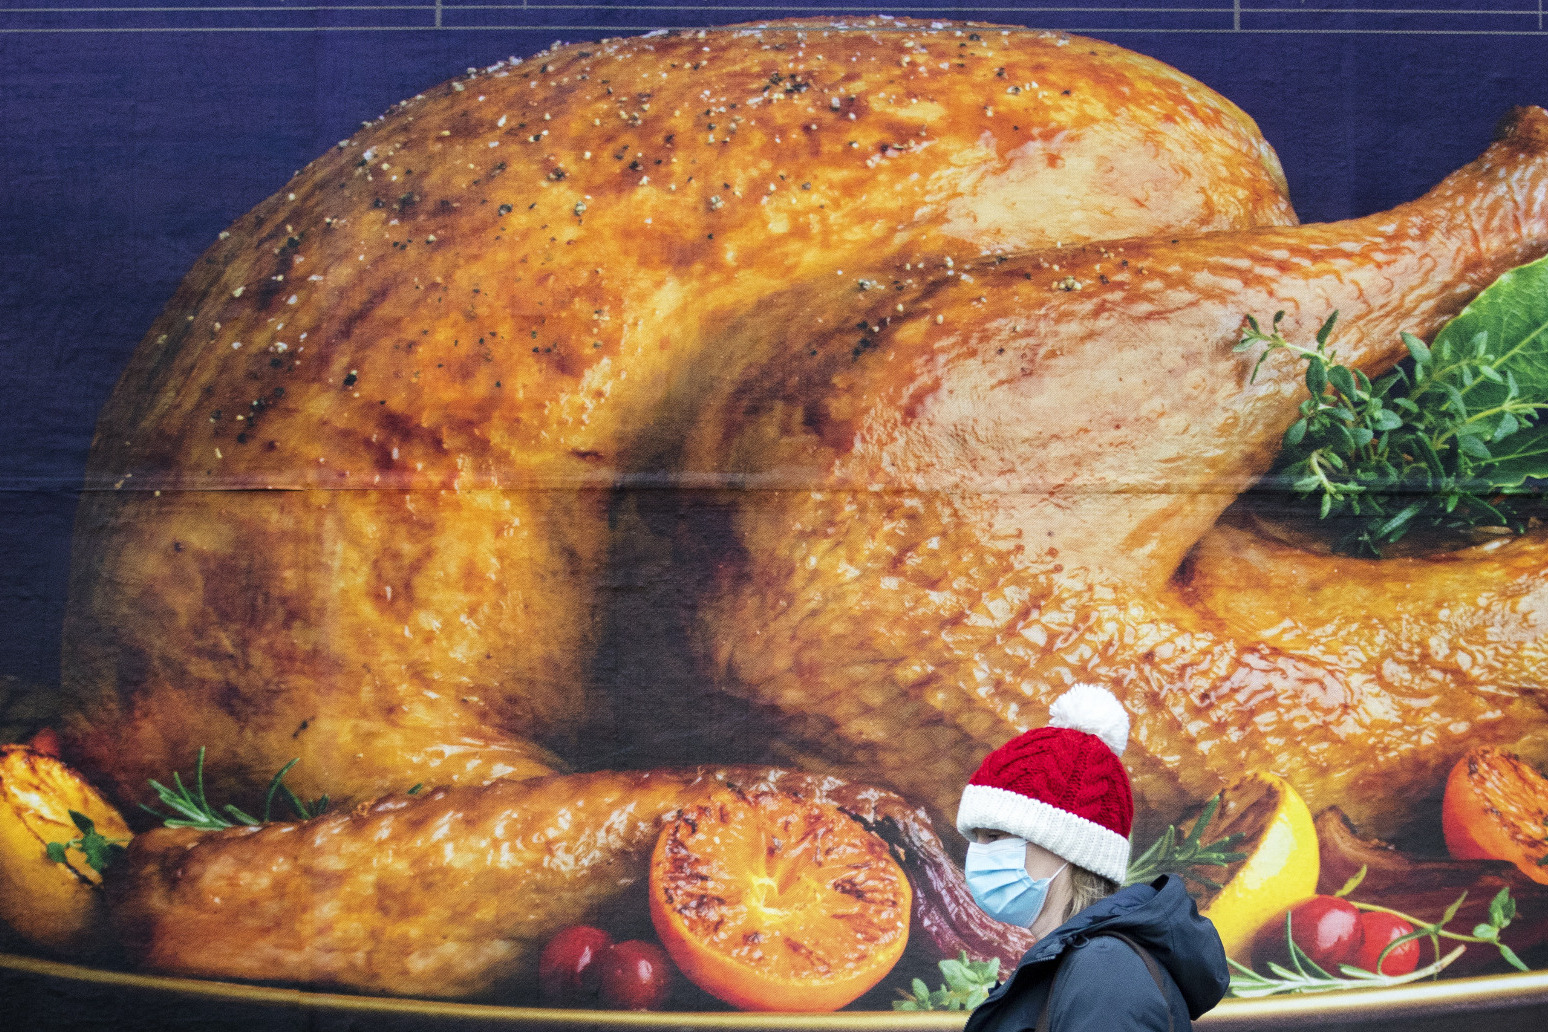 Most Britons unconcerned about missing out on Christmas turkey or tree this year 